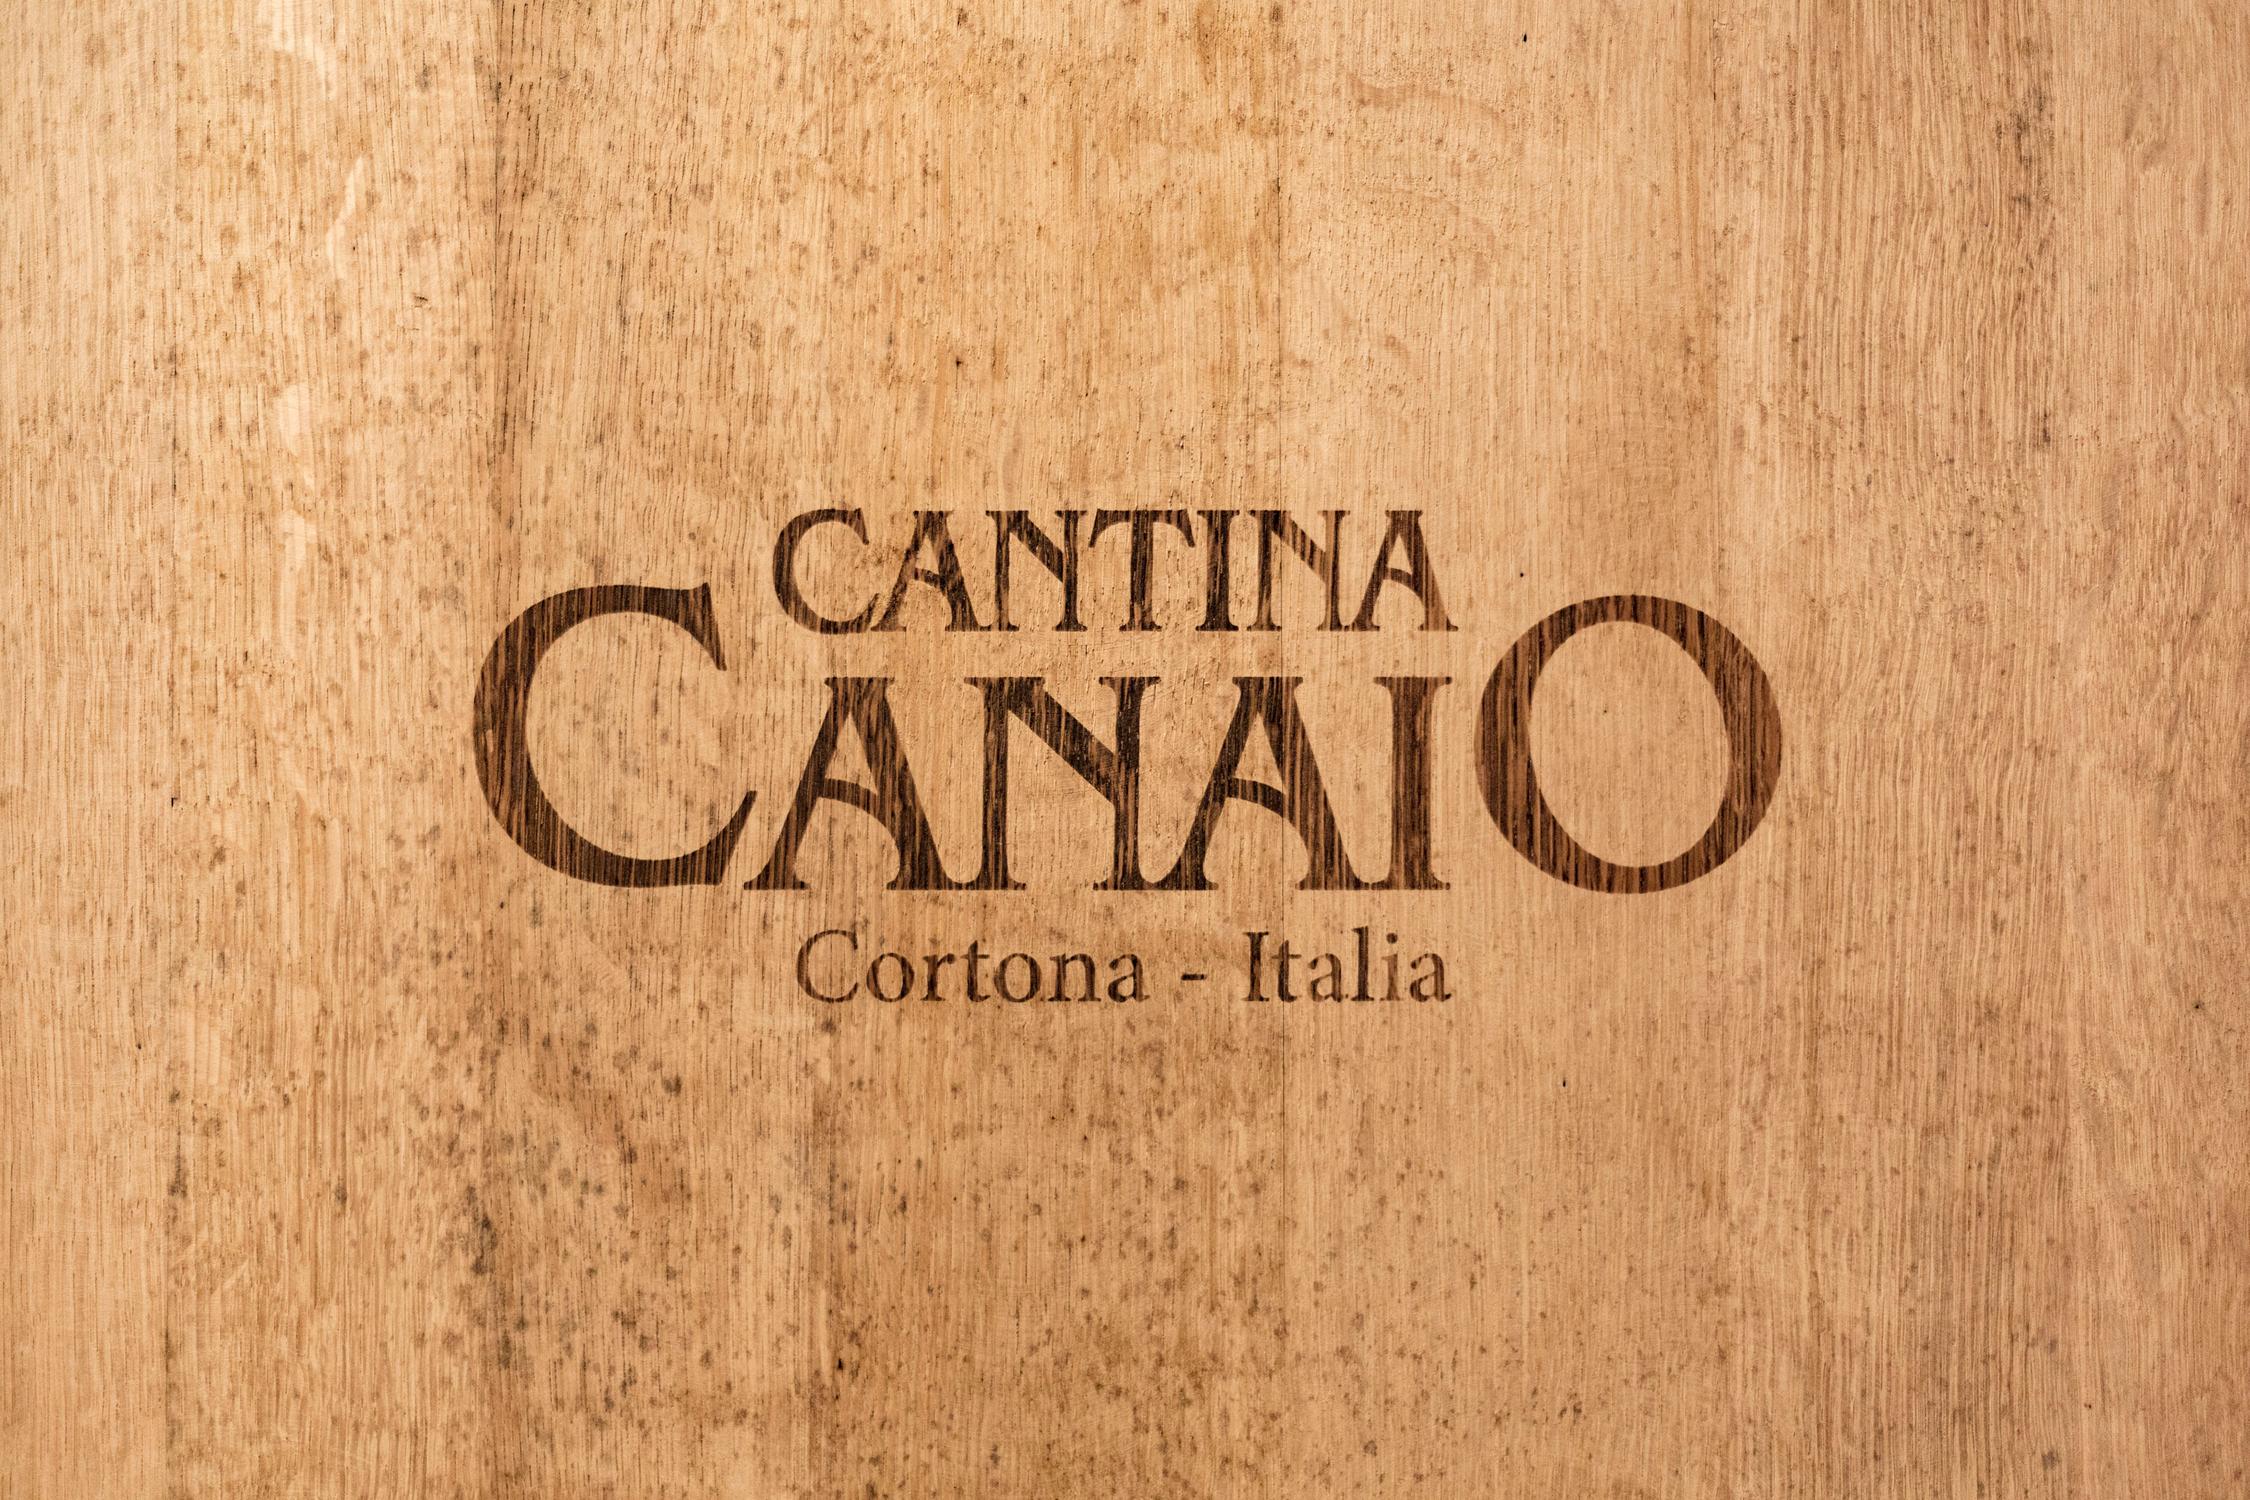 Cantina Canaio, distillates and grappa from Tuscany with production in Cortona